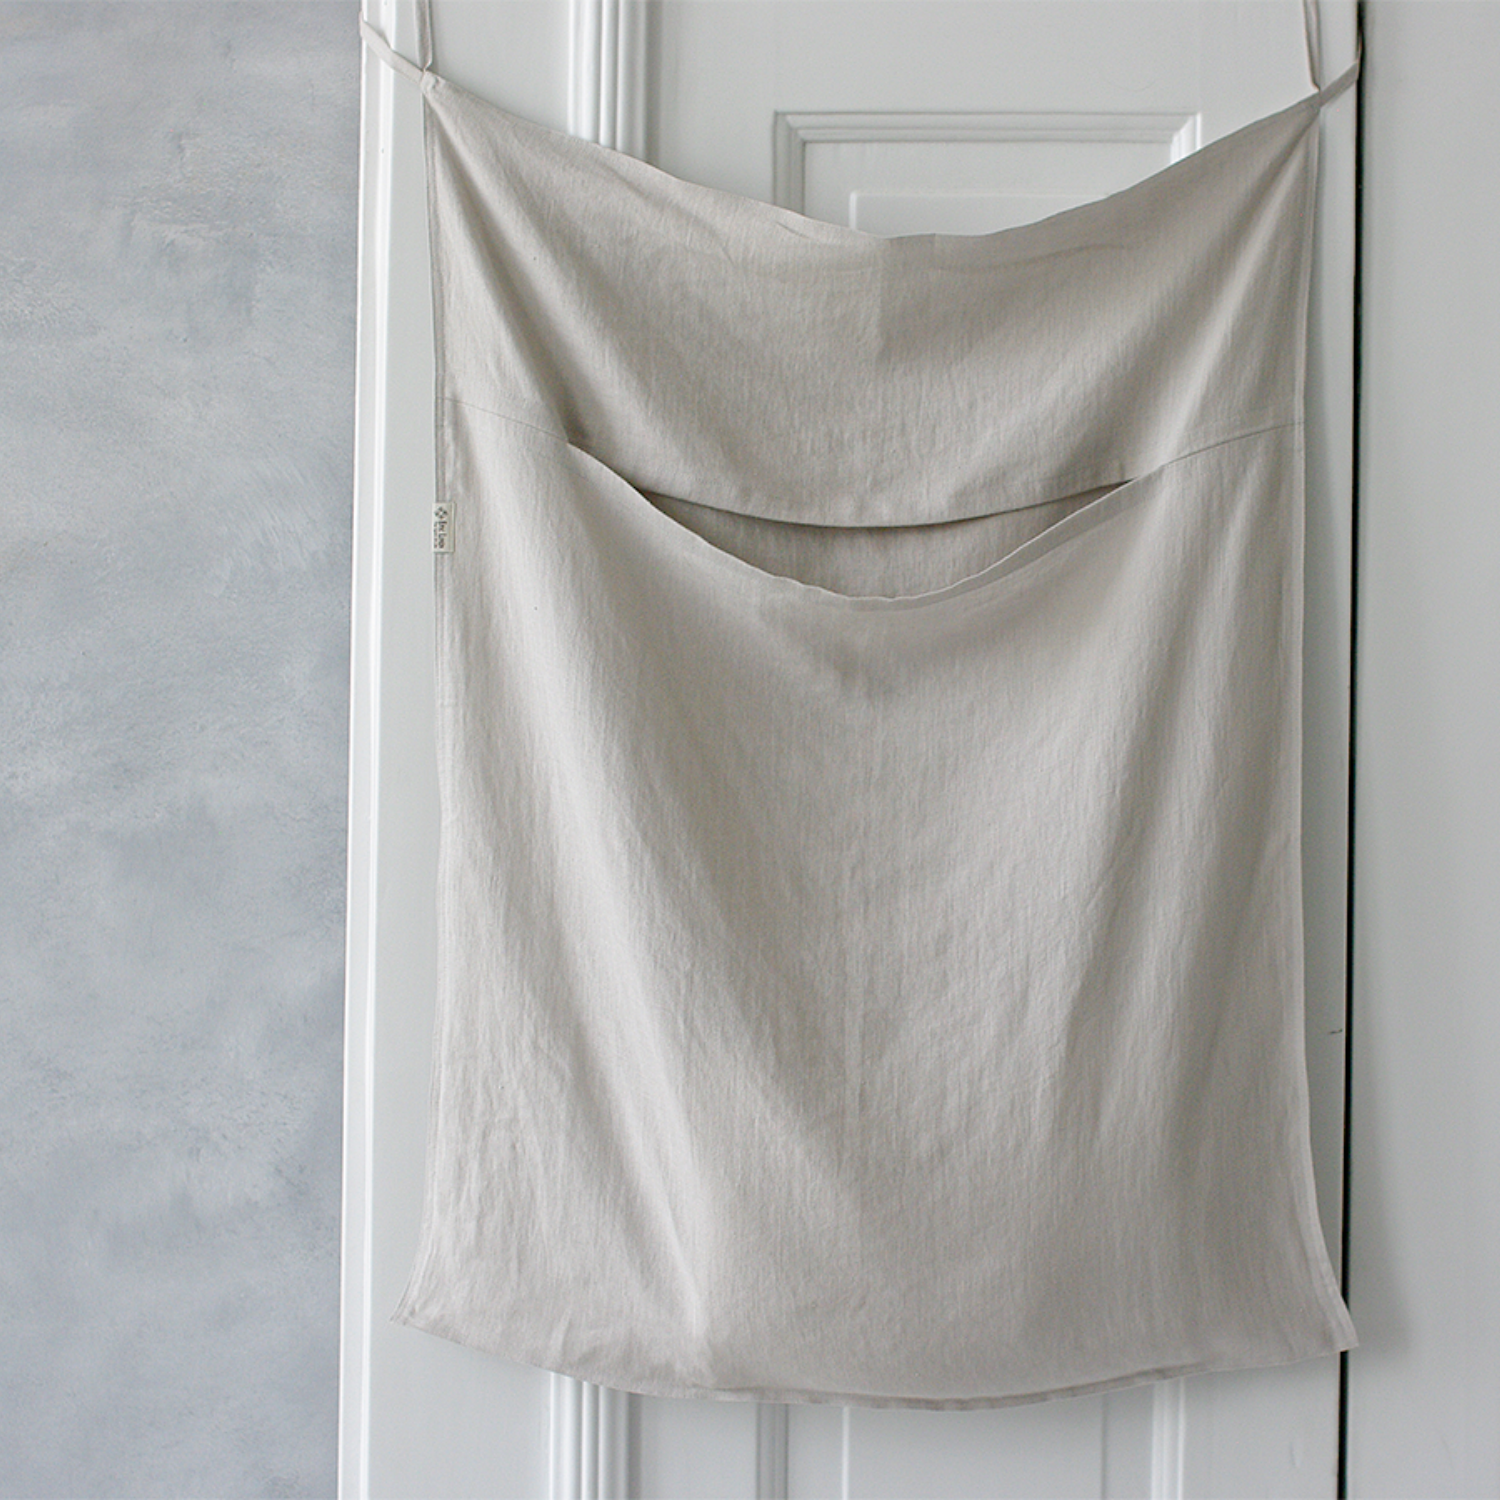 A white hanging linen laundry bag